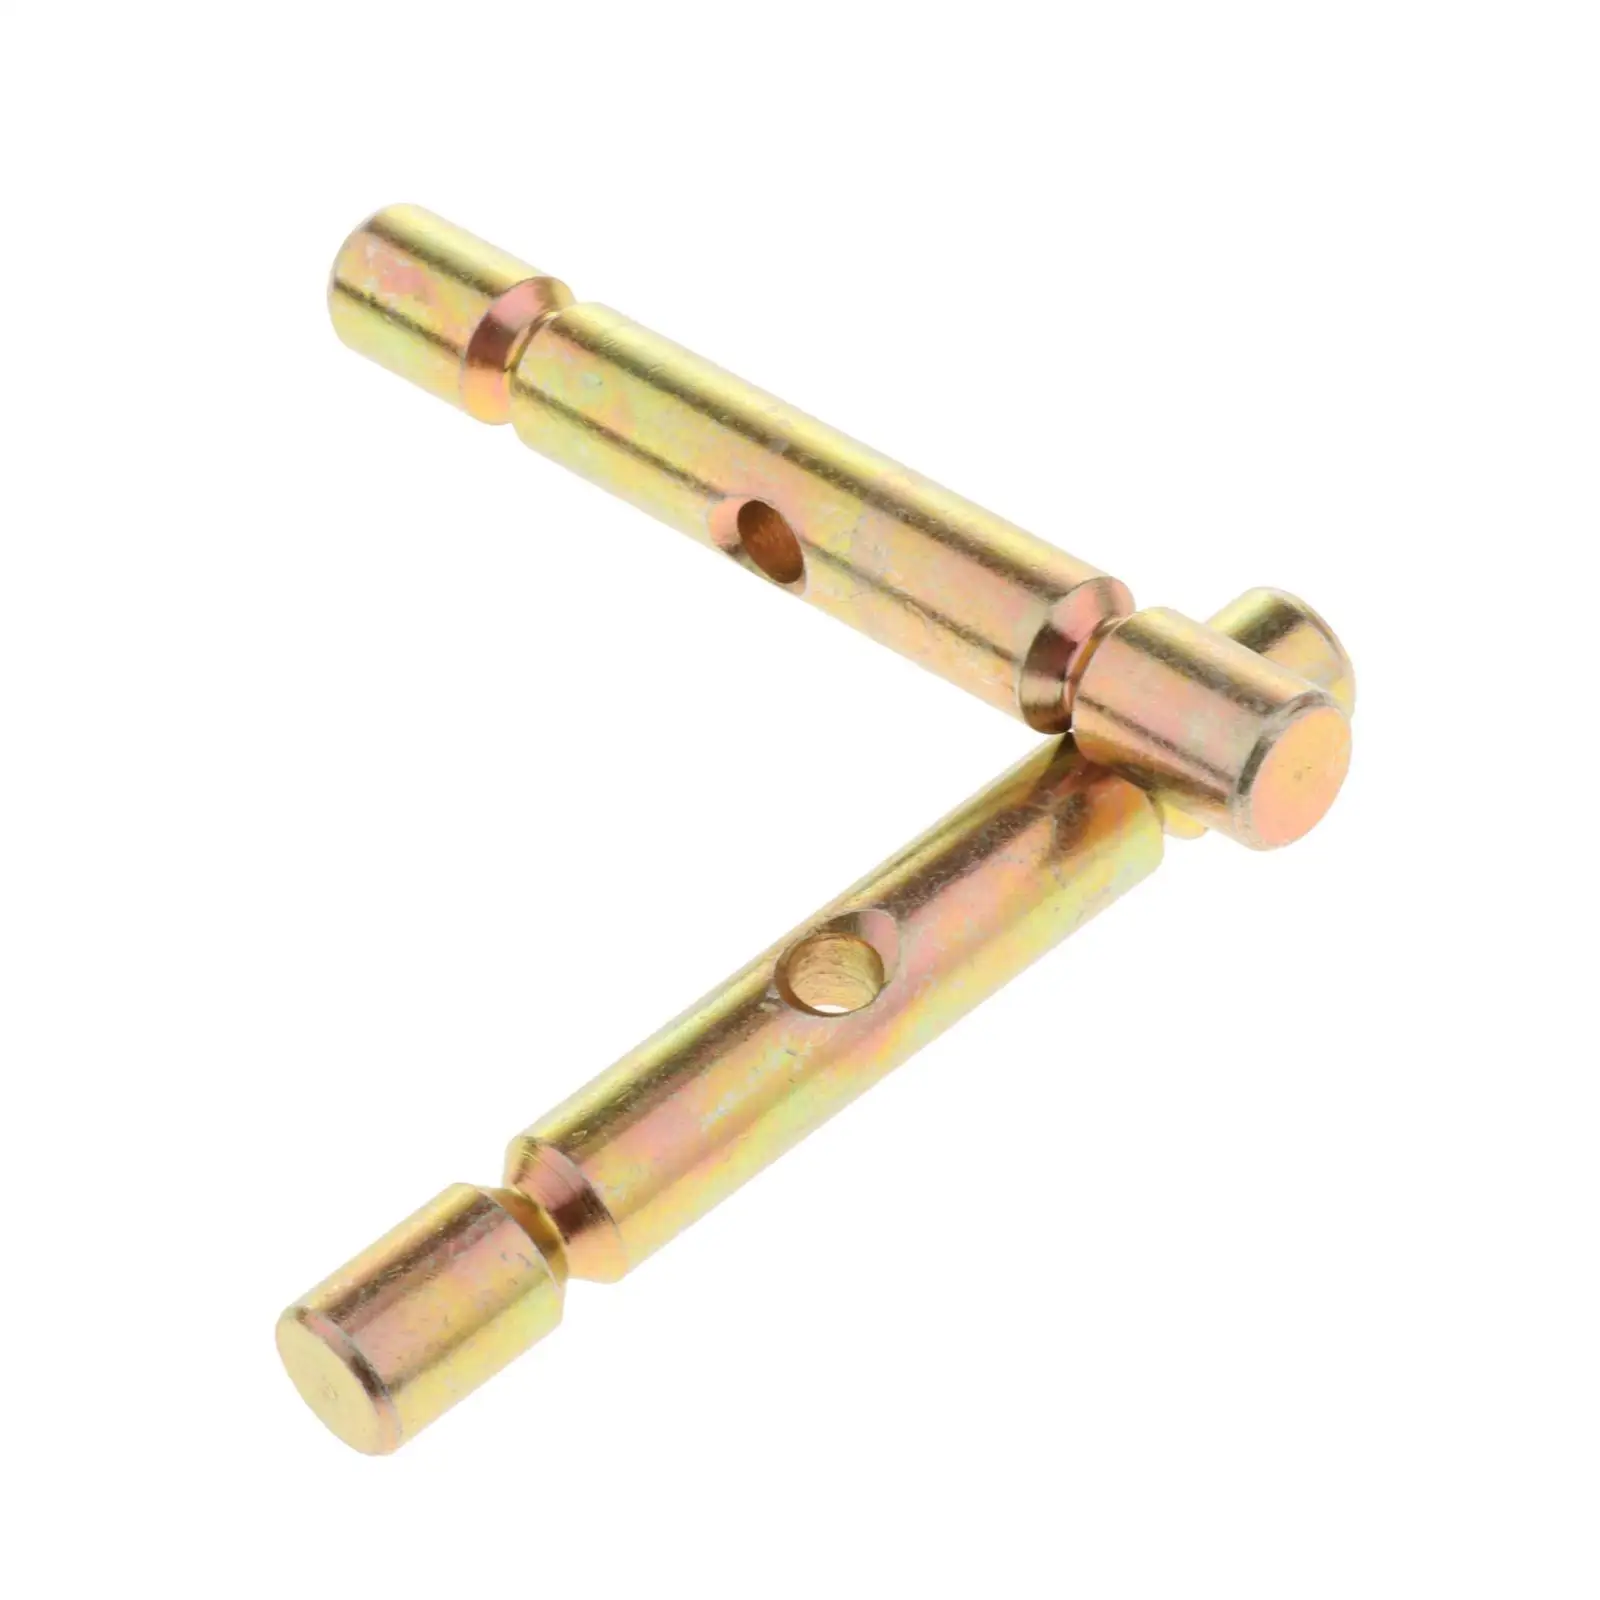 2 Pack Shear Pin fits for  2015 to 2019, Replace Part 05063, ,Durable Material